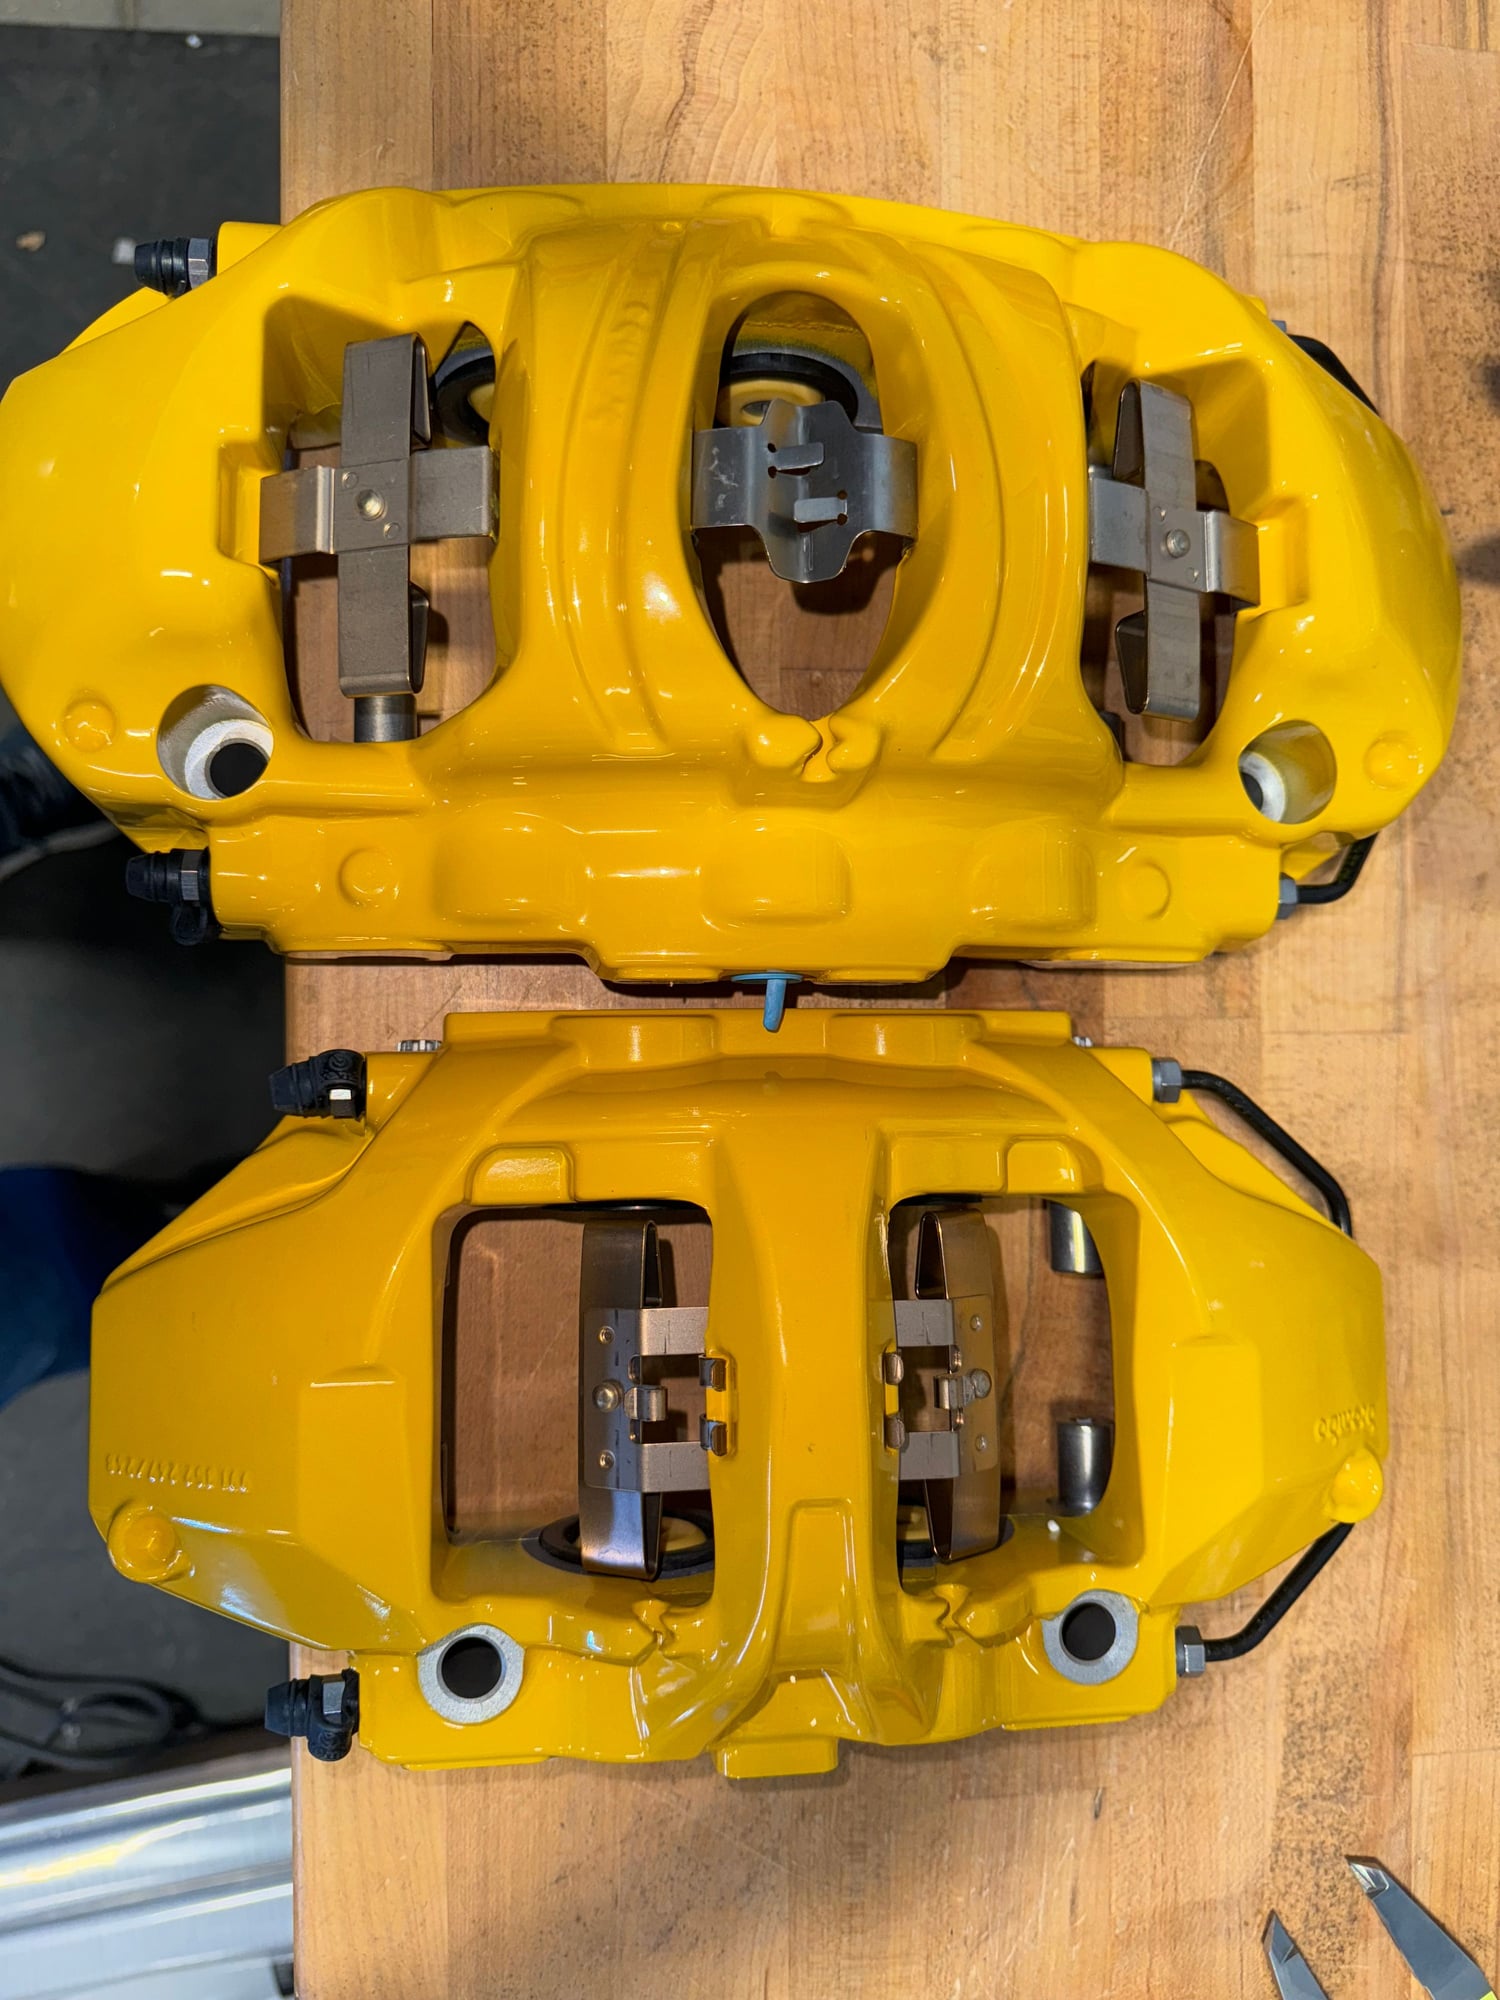 Brakes - NEW 992 GT3 PCCB Yellow Calipers - complete, never mounted! - New - San Diego, CA 92020, United States